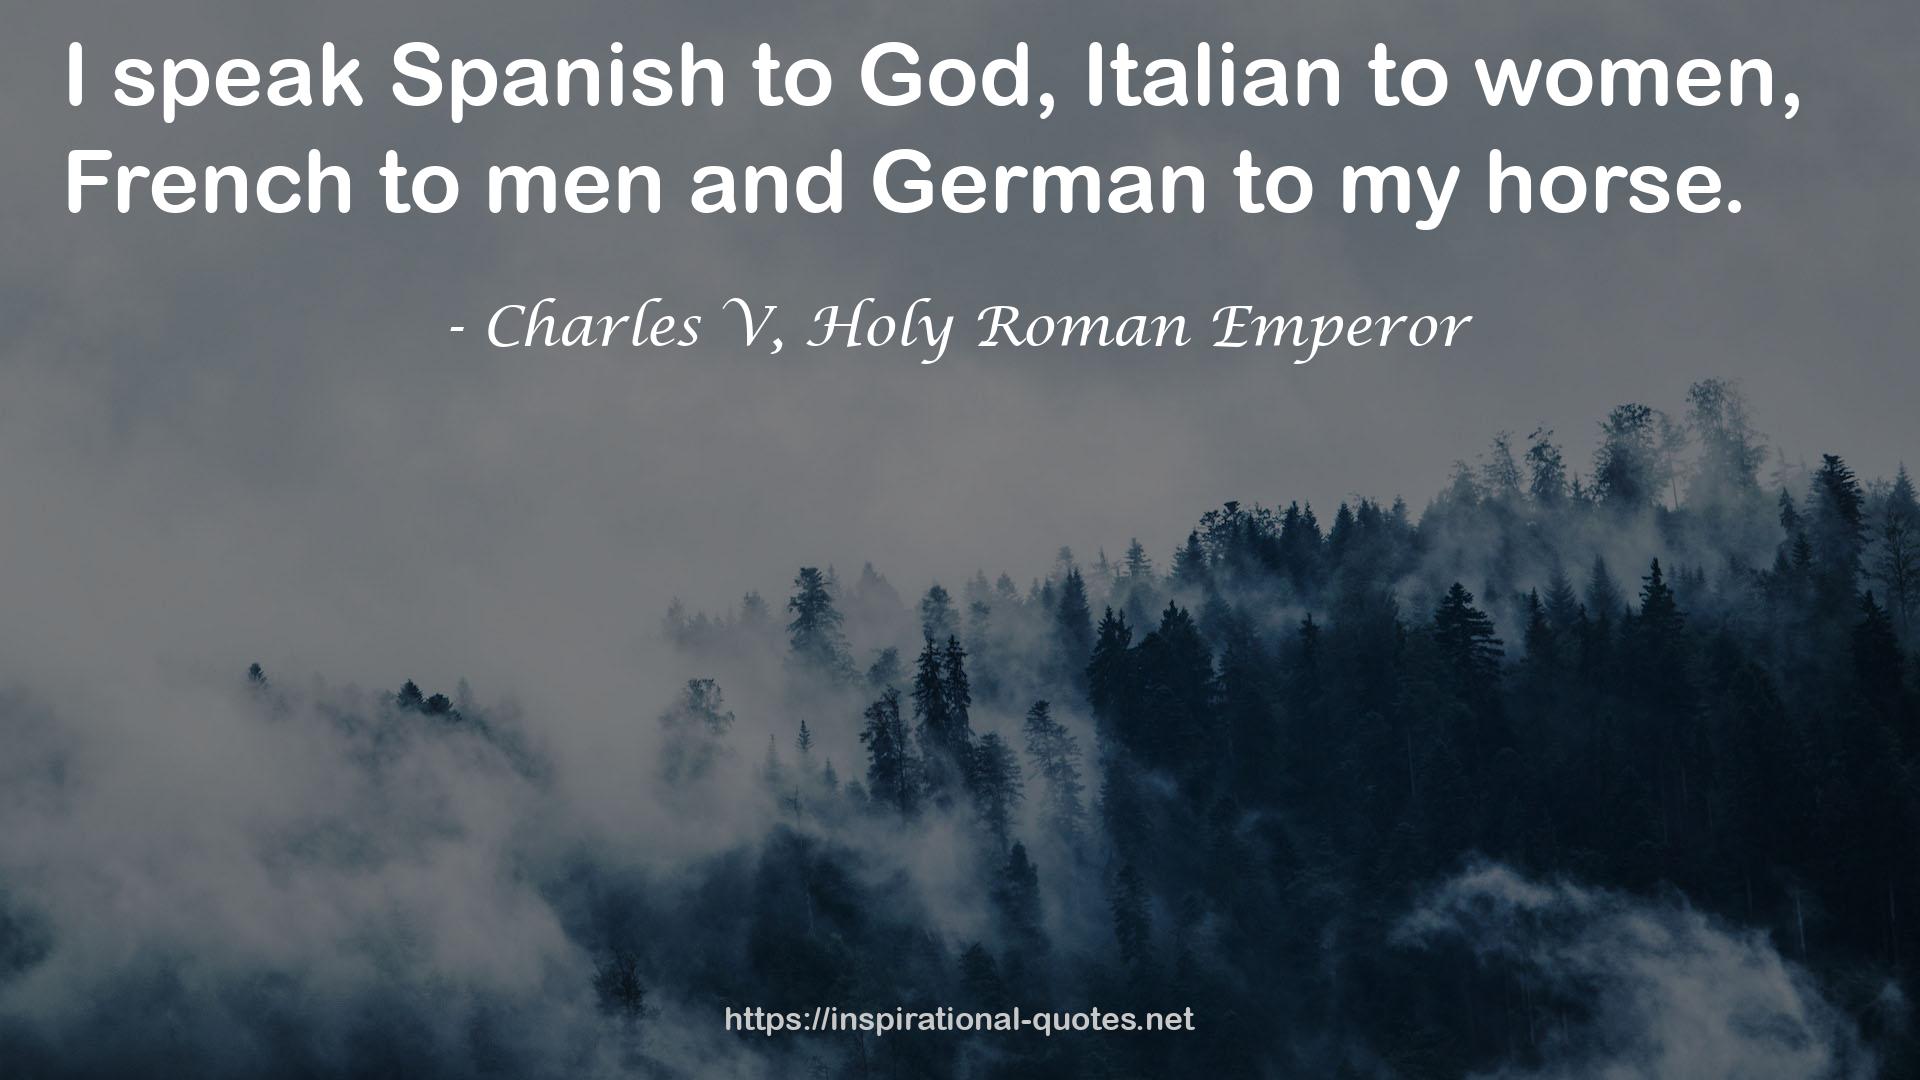 Charles V, Holy Roman Emperor QUOTES